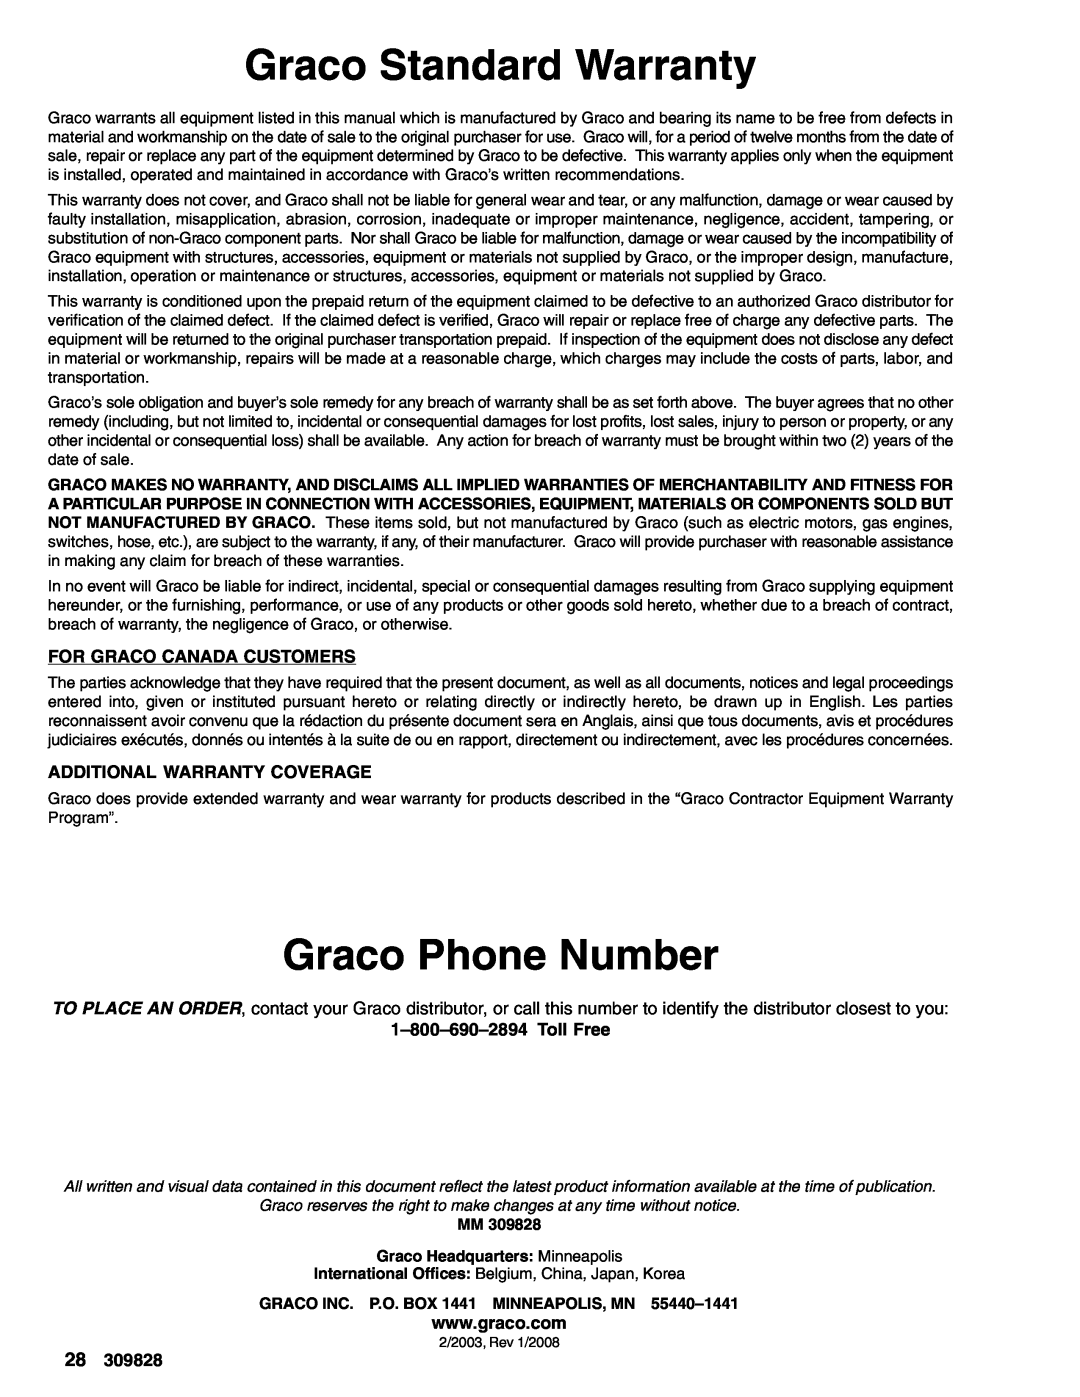 Graco 2525LD, 2626LD Graco Standard Warranty, Graco Phone Number, For Graco Canada Customers, Additional Warranty Coverage 